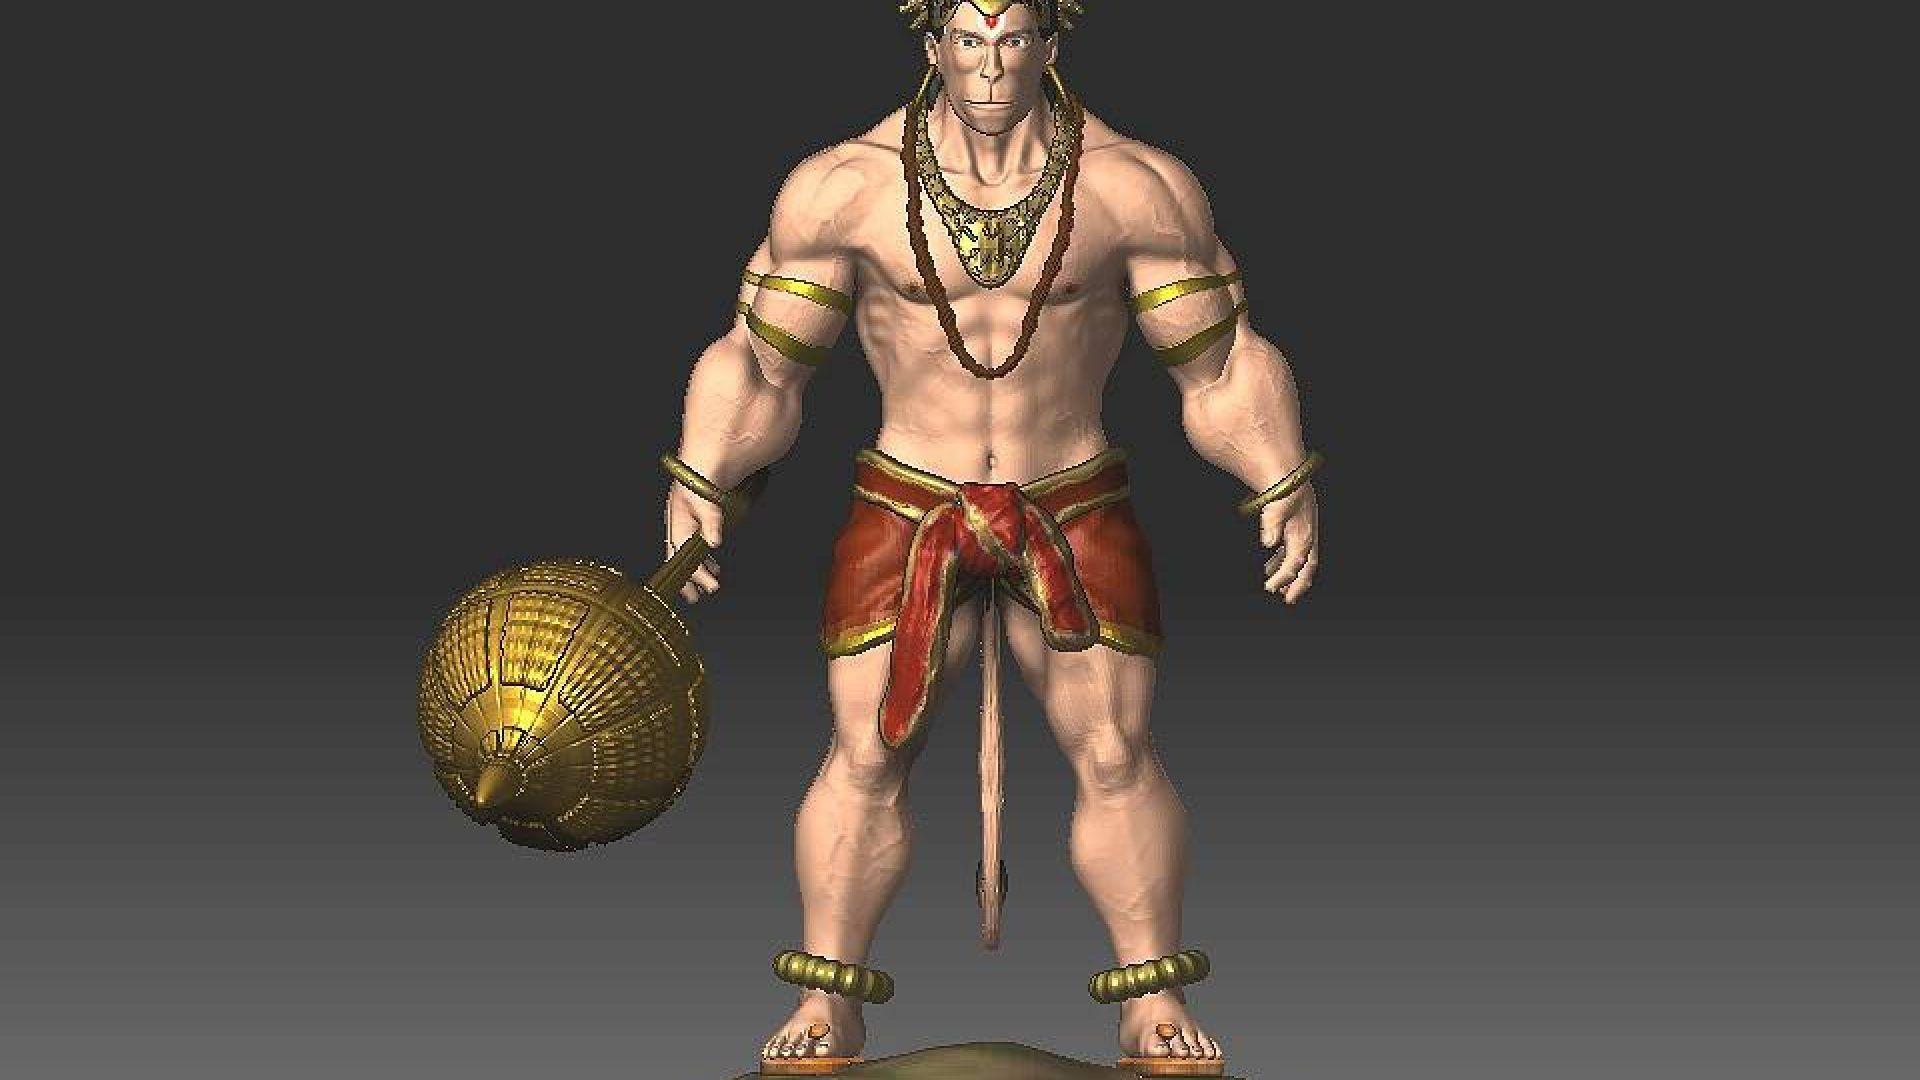 Featured image of post 3D Wallpaper Full Hd Hanuman Photos / We hope you enjoy our growing collection of hd images to use as a background or home screen for your smartphone or computer.